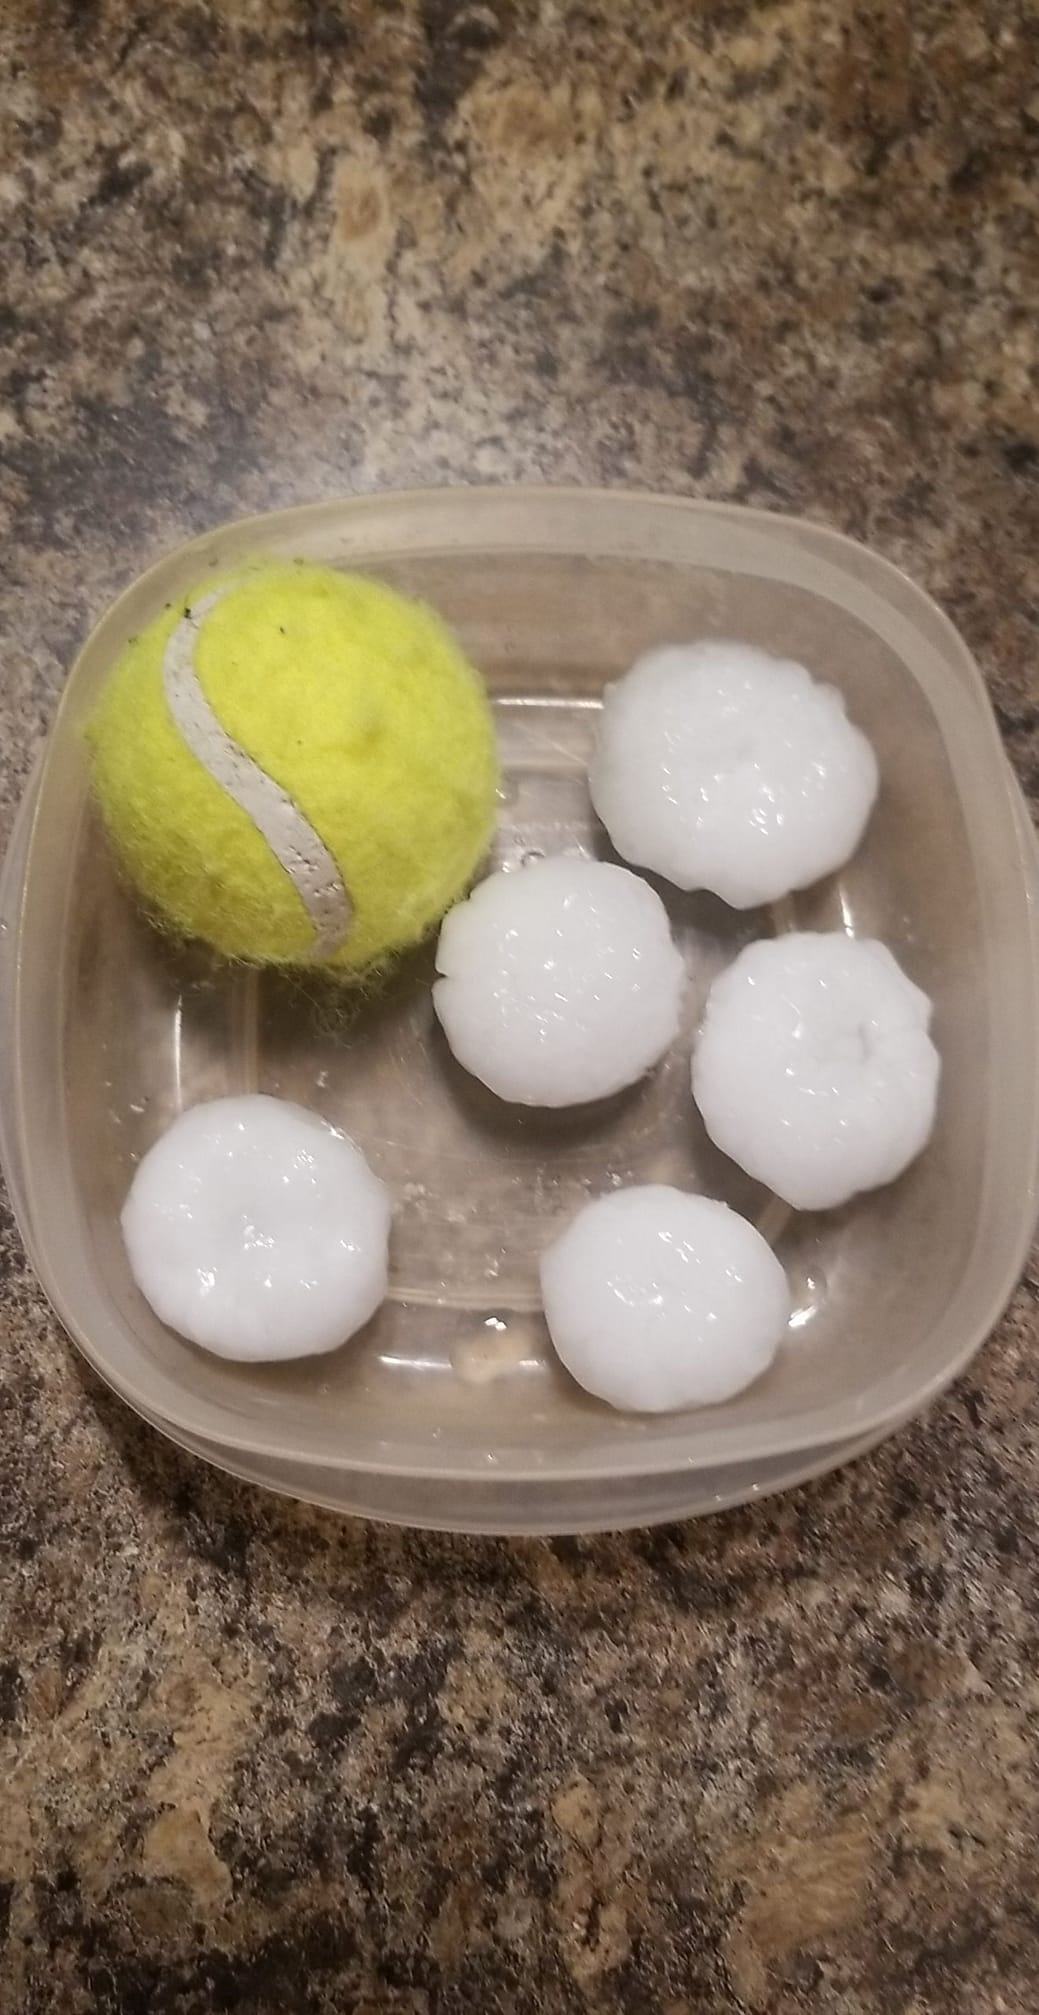 Large Hail in Sioux Falls